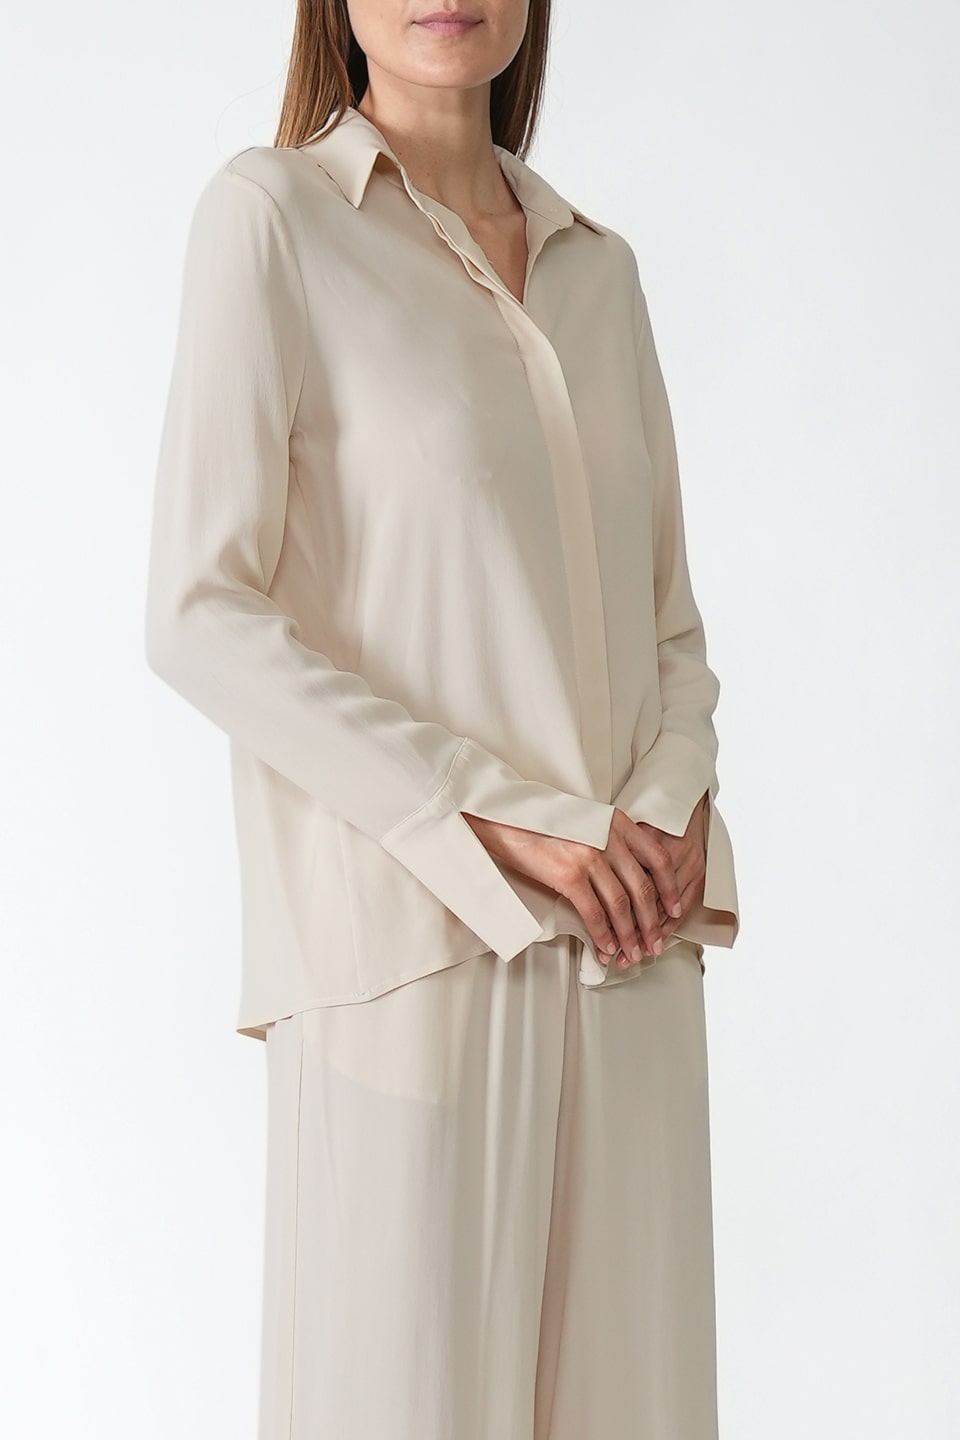 Thumbnail for Product gallery 3, Shirt with Slip on the Sleeve Ivory